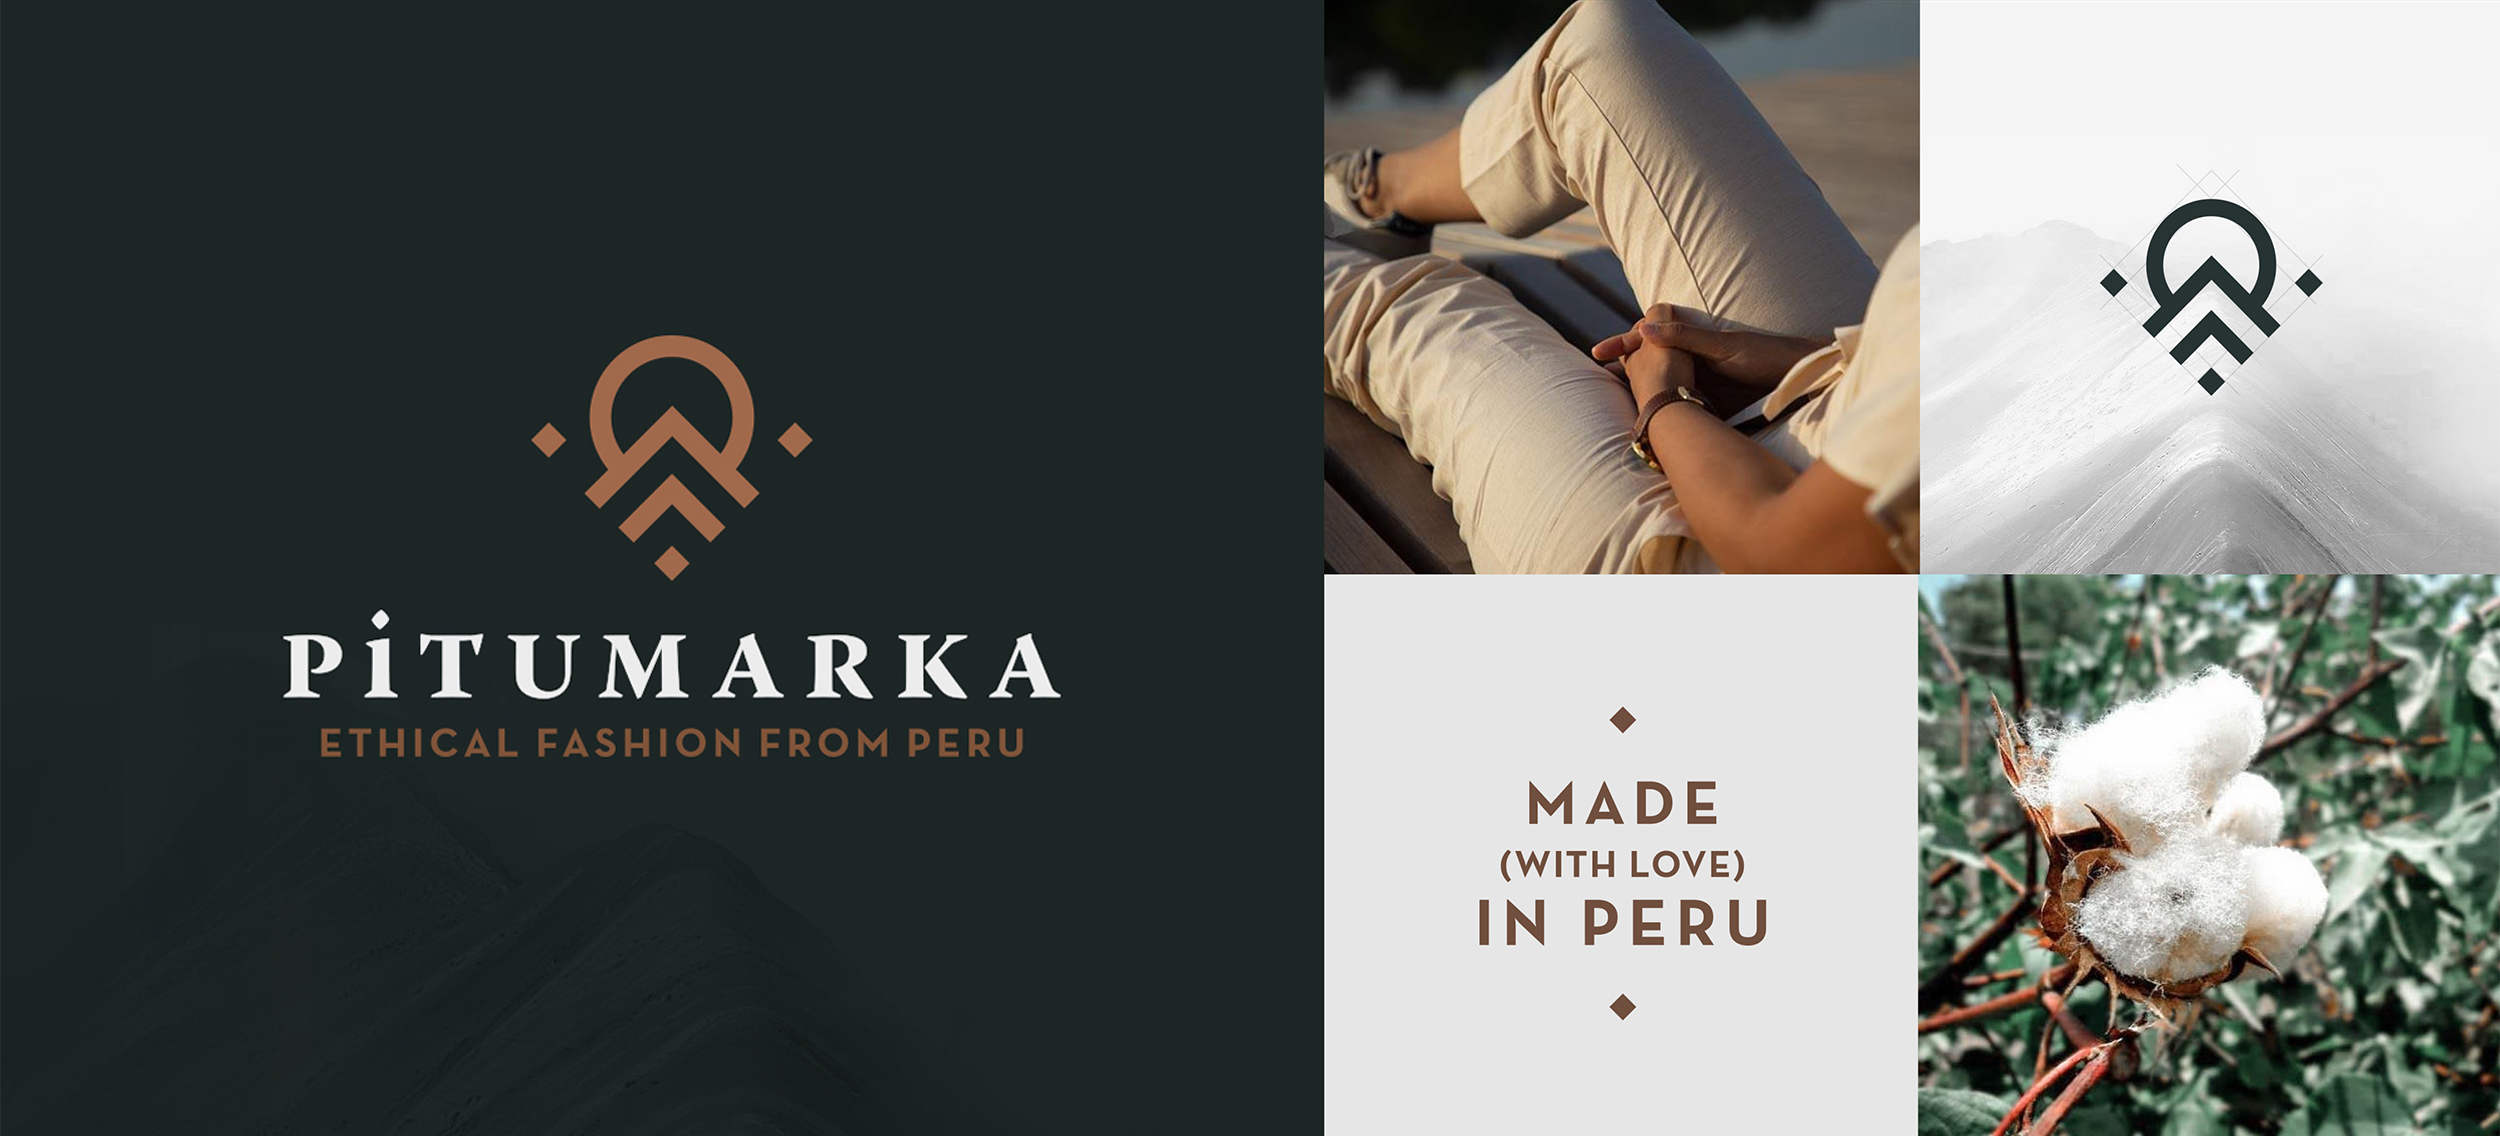 PITUMARKA, made (with love) in Peru